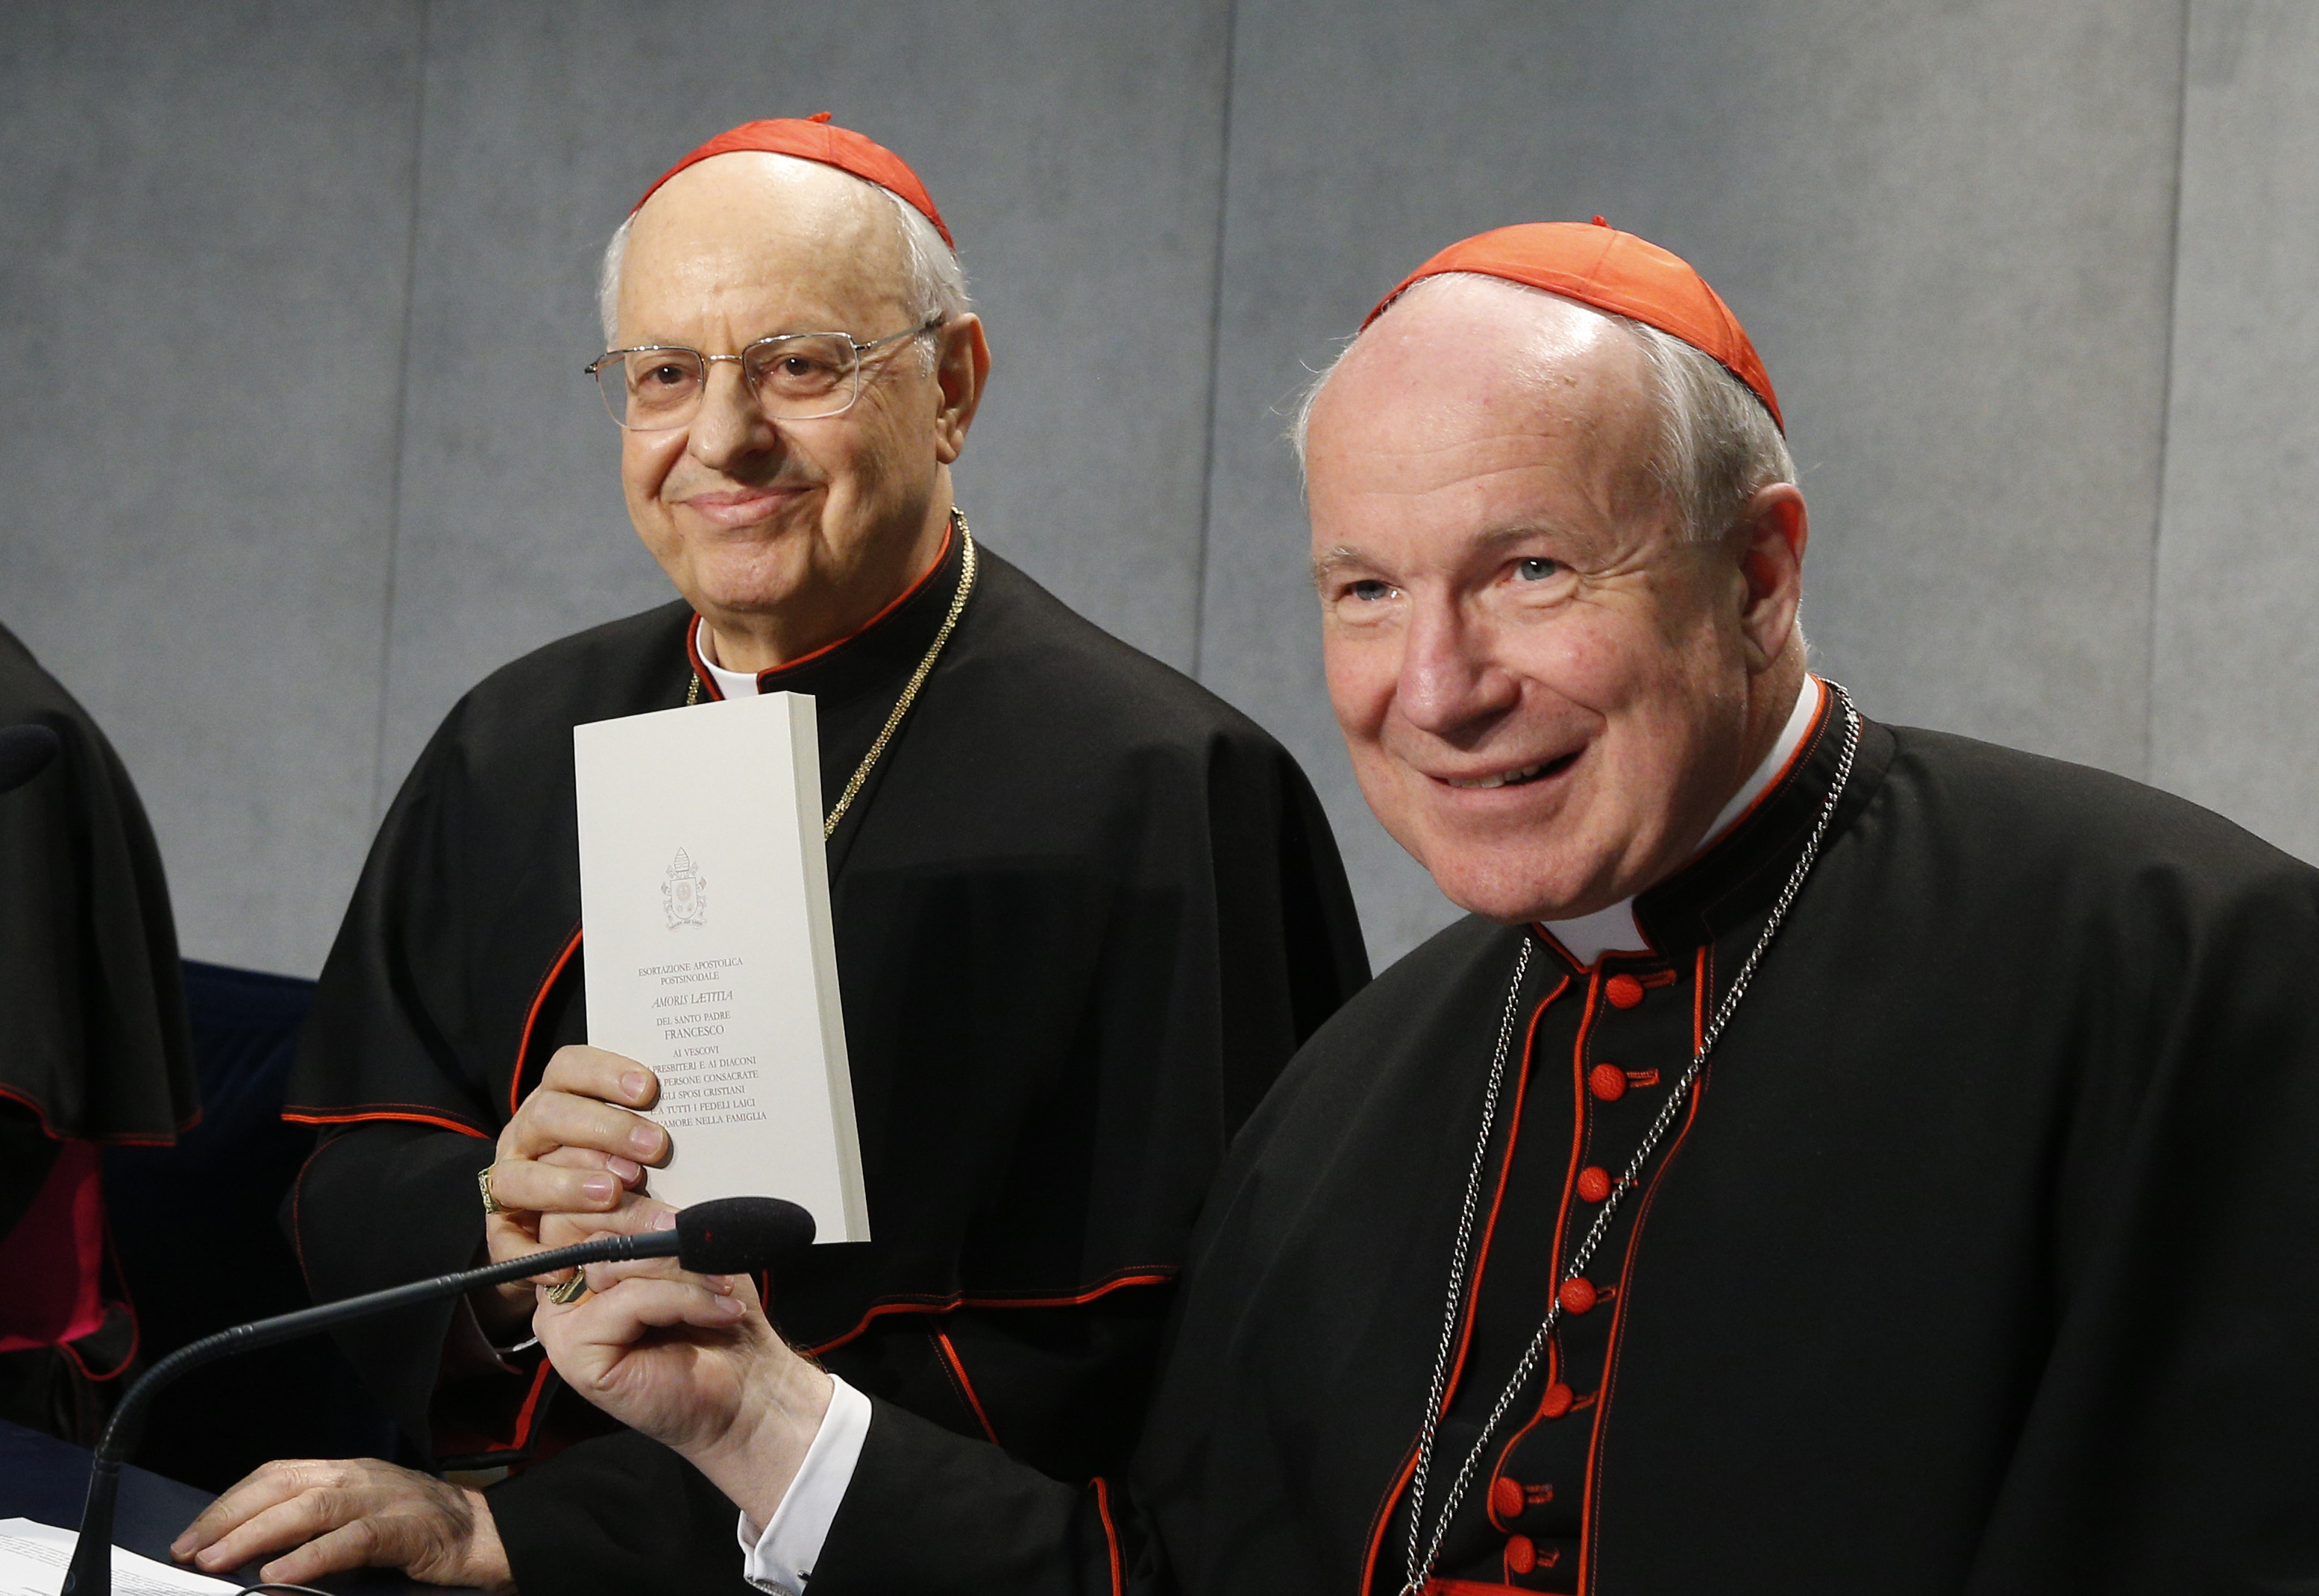 Cardinal Lorenzo Baldisseri, general secretary of the Synod of Bishops, and Austrian Cardinal Christoph Schonborn, holds a copy of Pope Francis' apostolic exhortation on the family, "Amoris Laetitia" ("The Joy of Love"), during a news conference for the document's release at the Vatican April 8. The exhortation is the concluding document of the 2014 and 2015 synods of bishops on the family. (CNS photo/Paul Haring) See POPE-FAMILY-EXHORTATION and VATICAN-LETTER-FAMILY April 8, 2016.